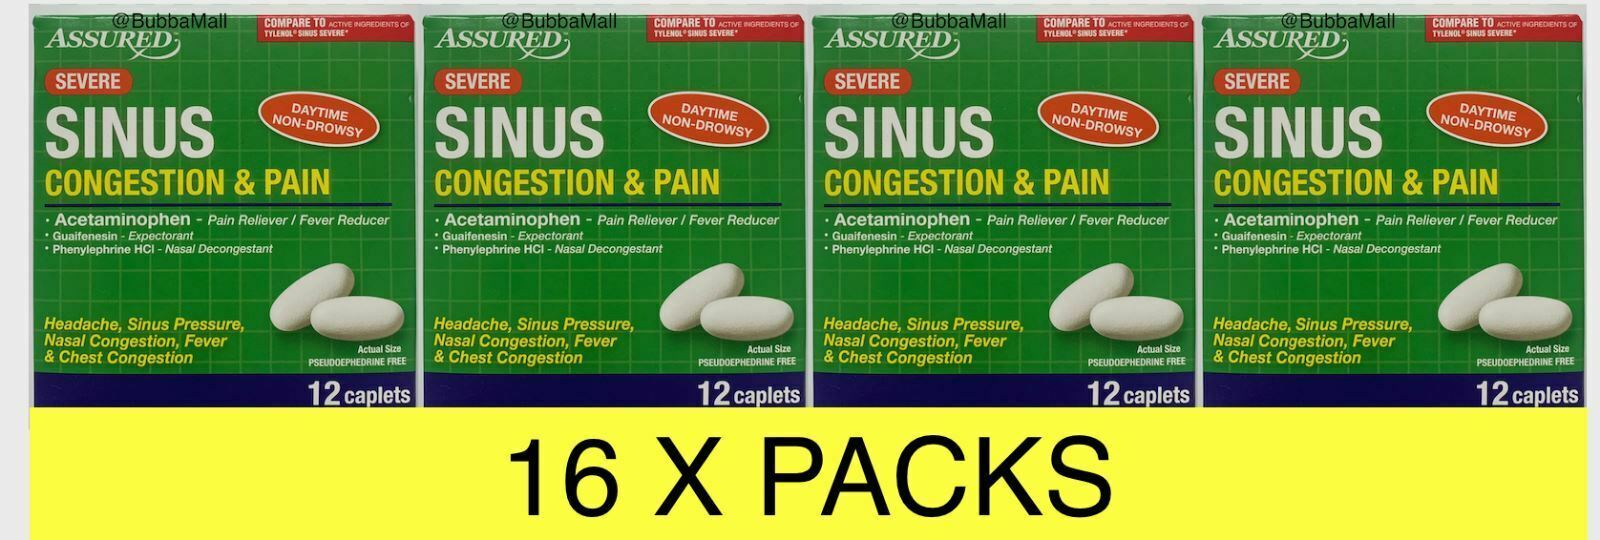 16 Pack Assured Severe Sinus Congestion & Pain Daytime Formula (192 ct Total) - $39.99